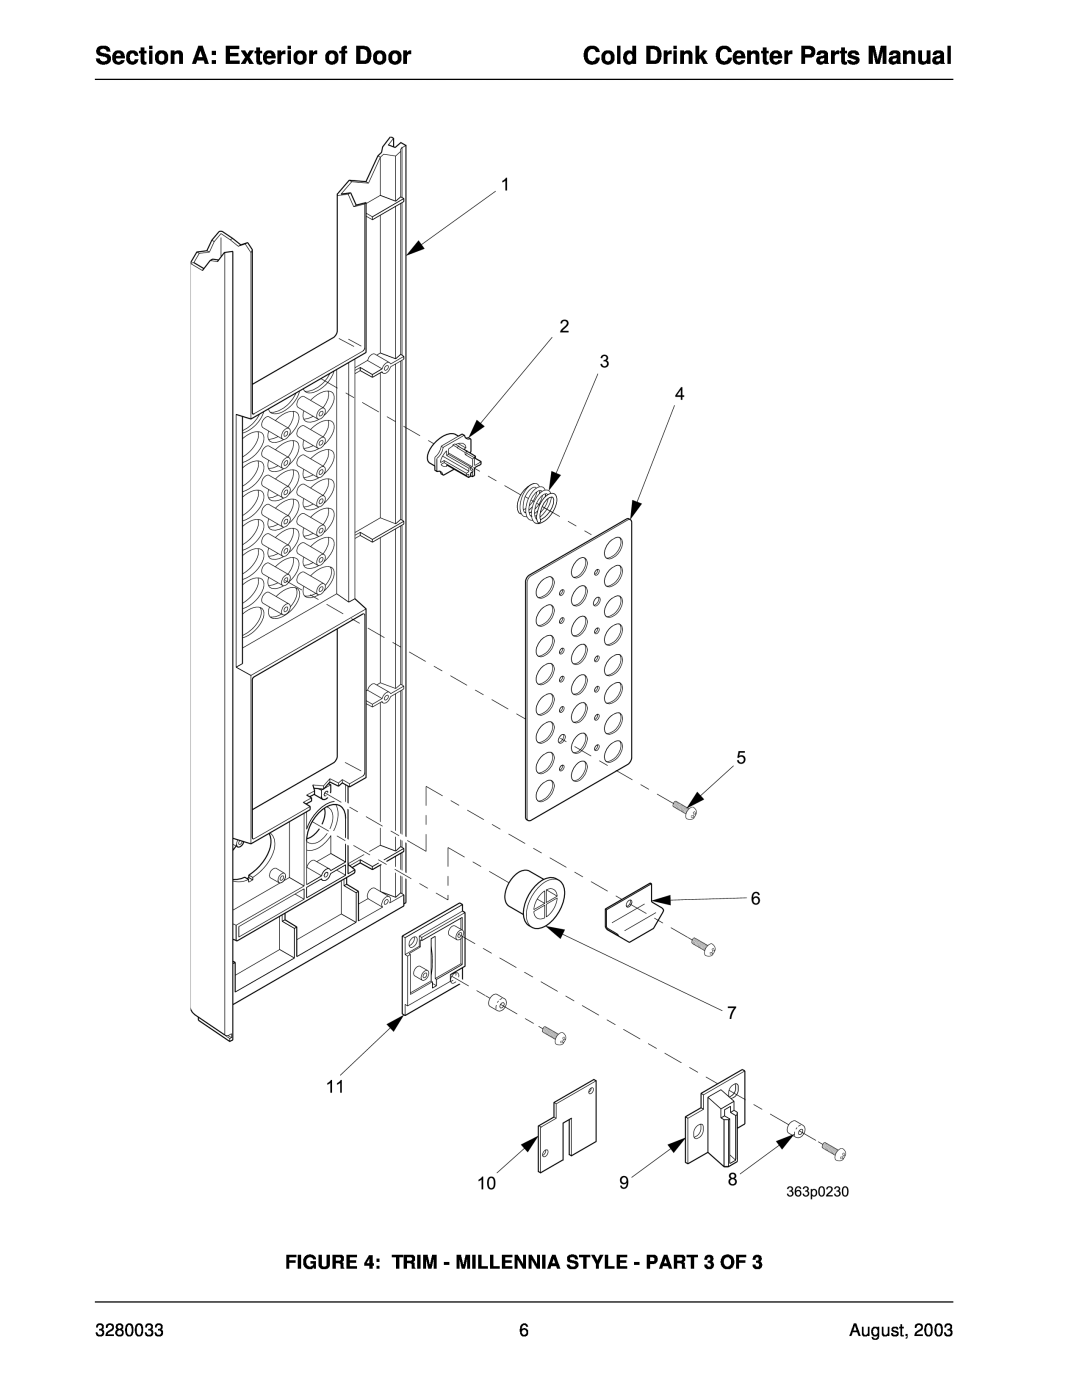 Crane Merchandising Systems 328, 327 manual Section A Exterior of Door, Cold Drink Center Parts Manual 